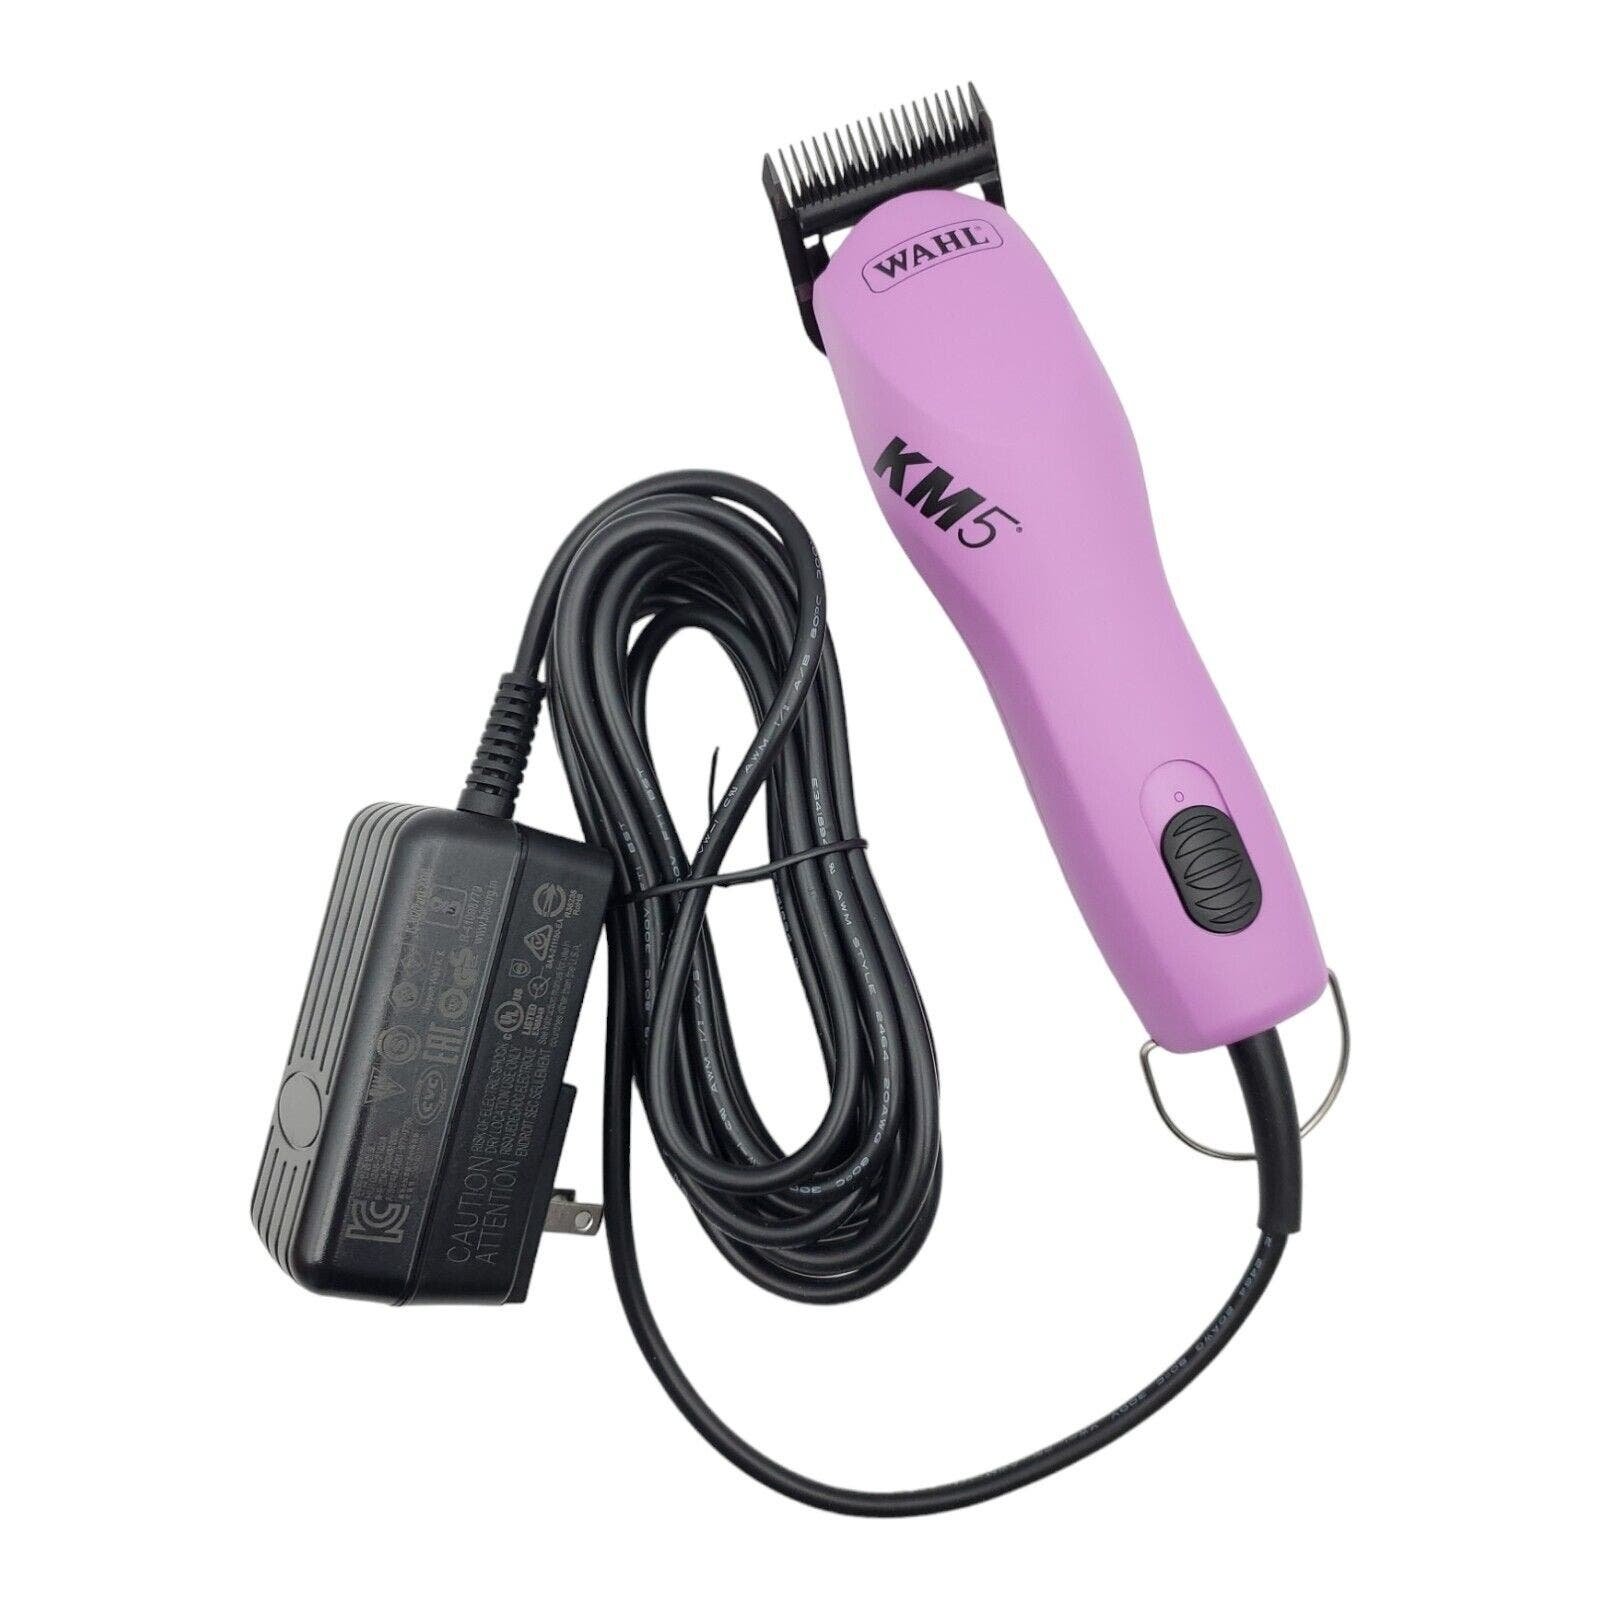 Wahl KM5 2 Speed Brushless Motor Dog Clipper With 7F Blade Purple - New OPEN BOX 7kkVjJ8XY